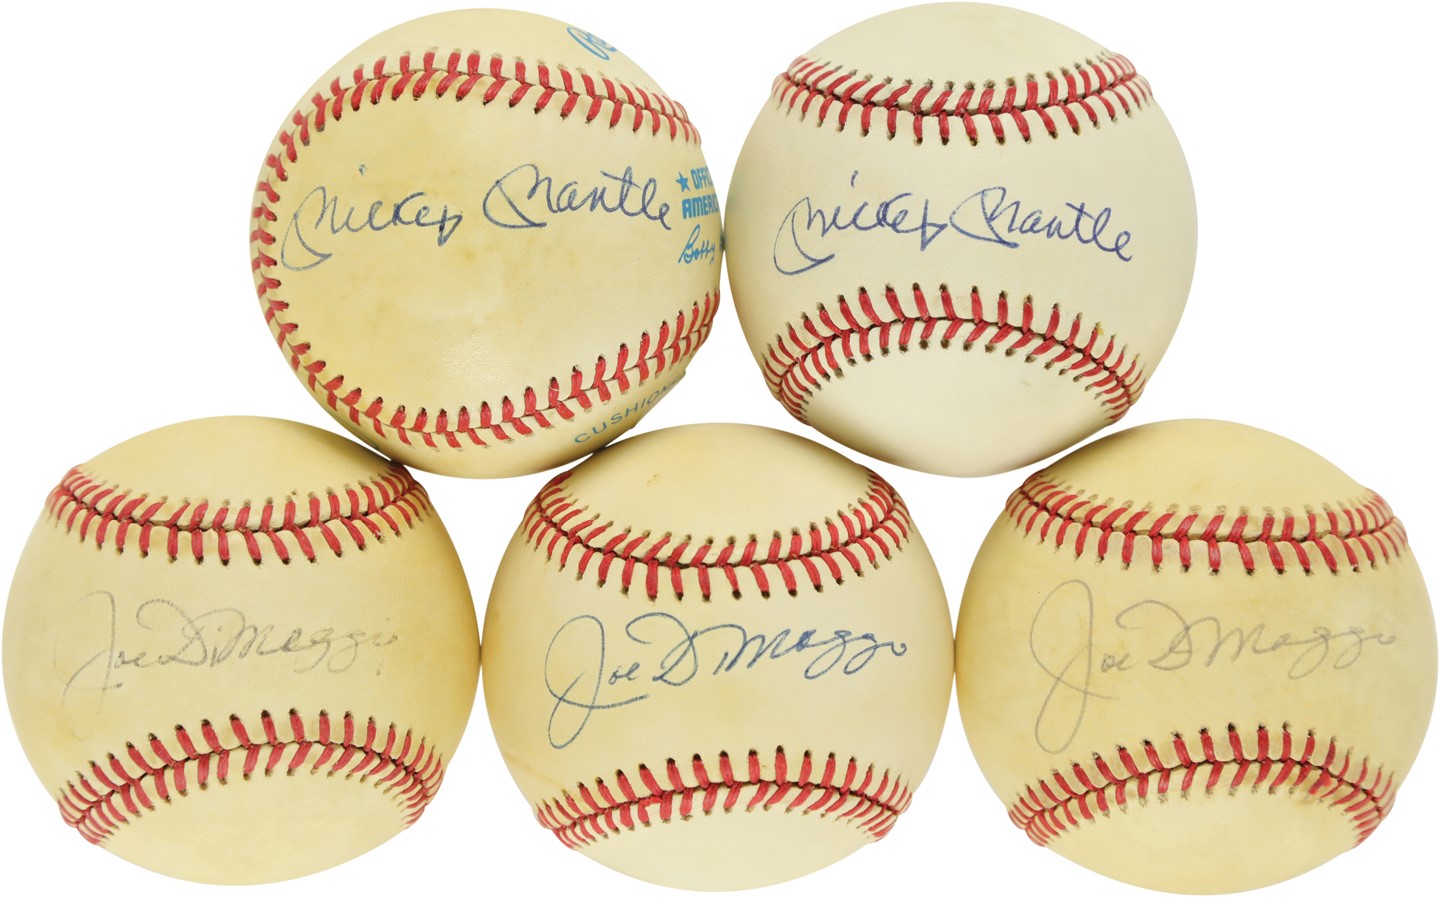 Baseball Autographs - Five Mickey Mantle and Joe DiMaggio Signed Baseballs with One Dual-Signed (All PSA)